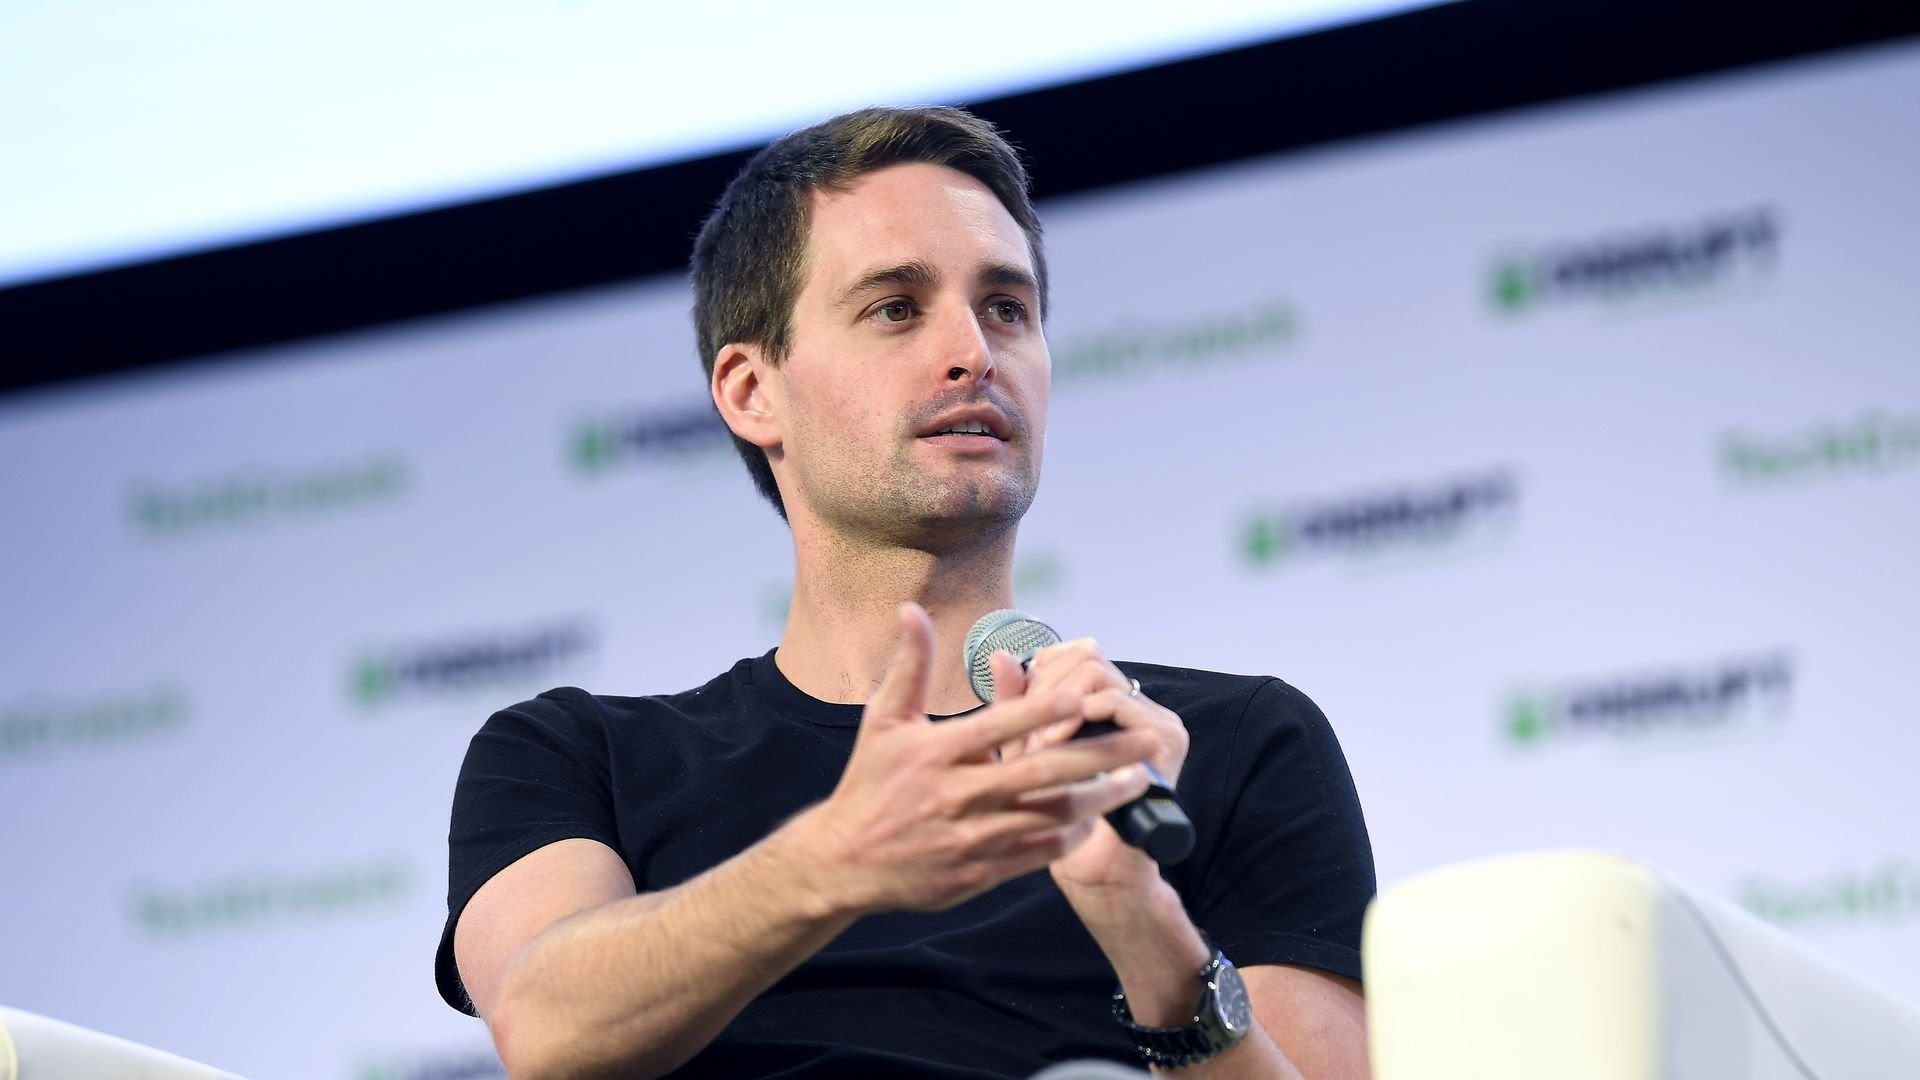 Major Snap restructuring to include 20% layoffs, product pullbacks